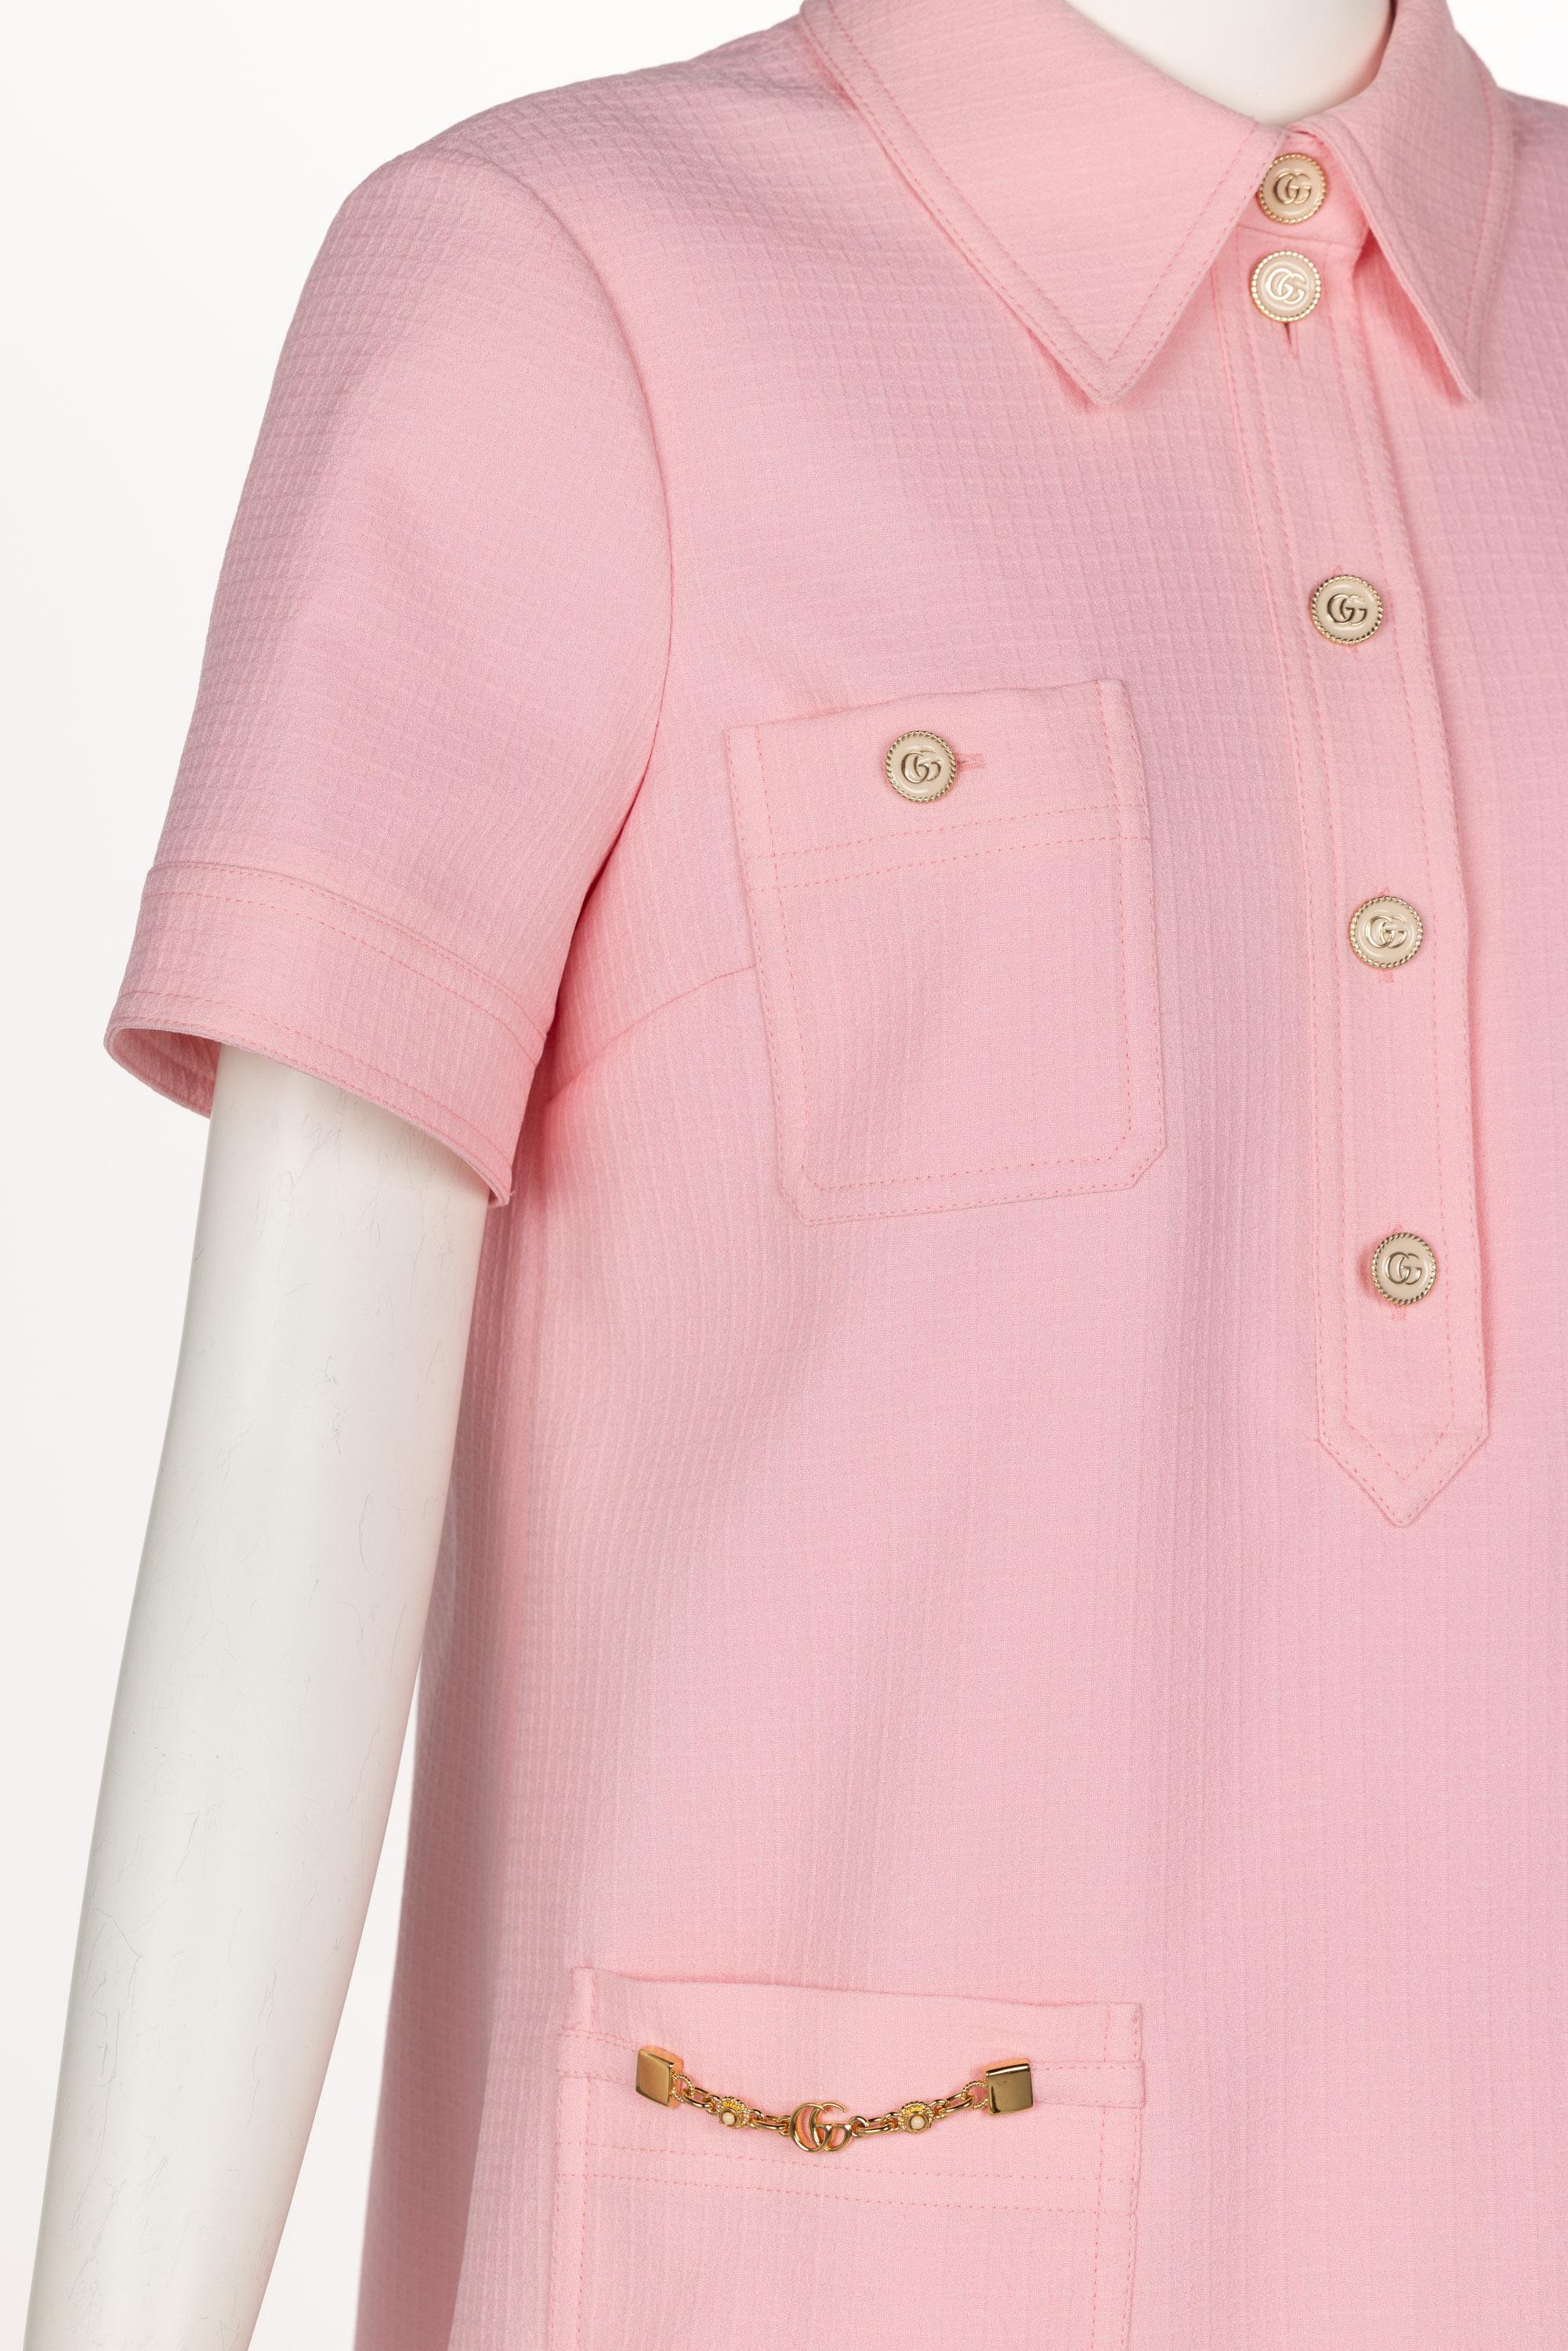 Gucci Pink Textured Chain Trim Mini Polo Dress New w/ Tags For Sale 4